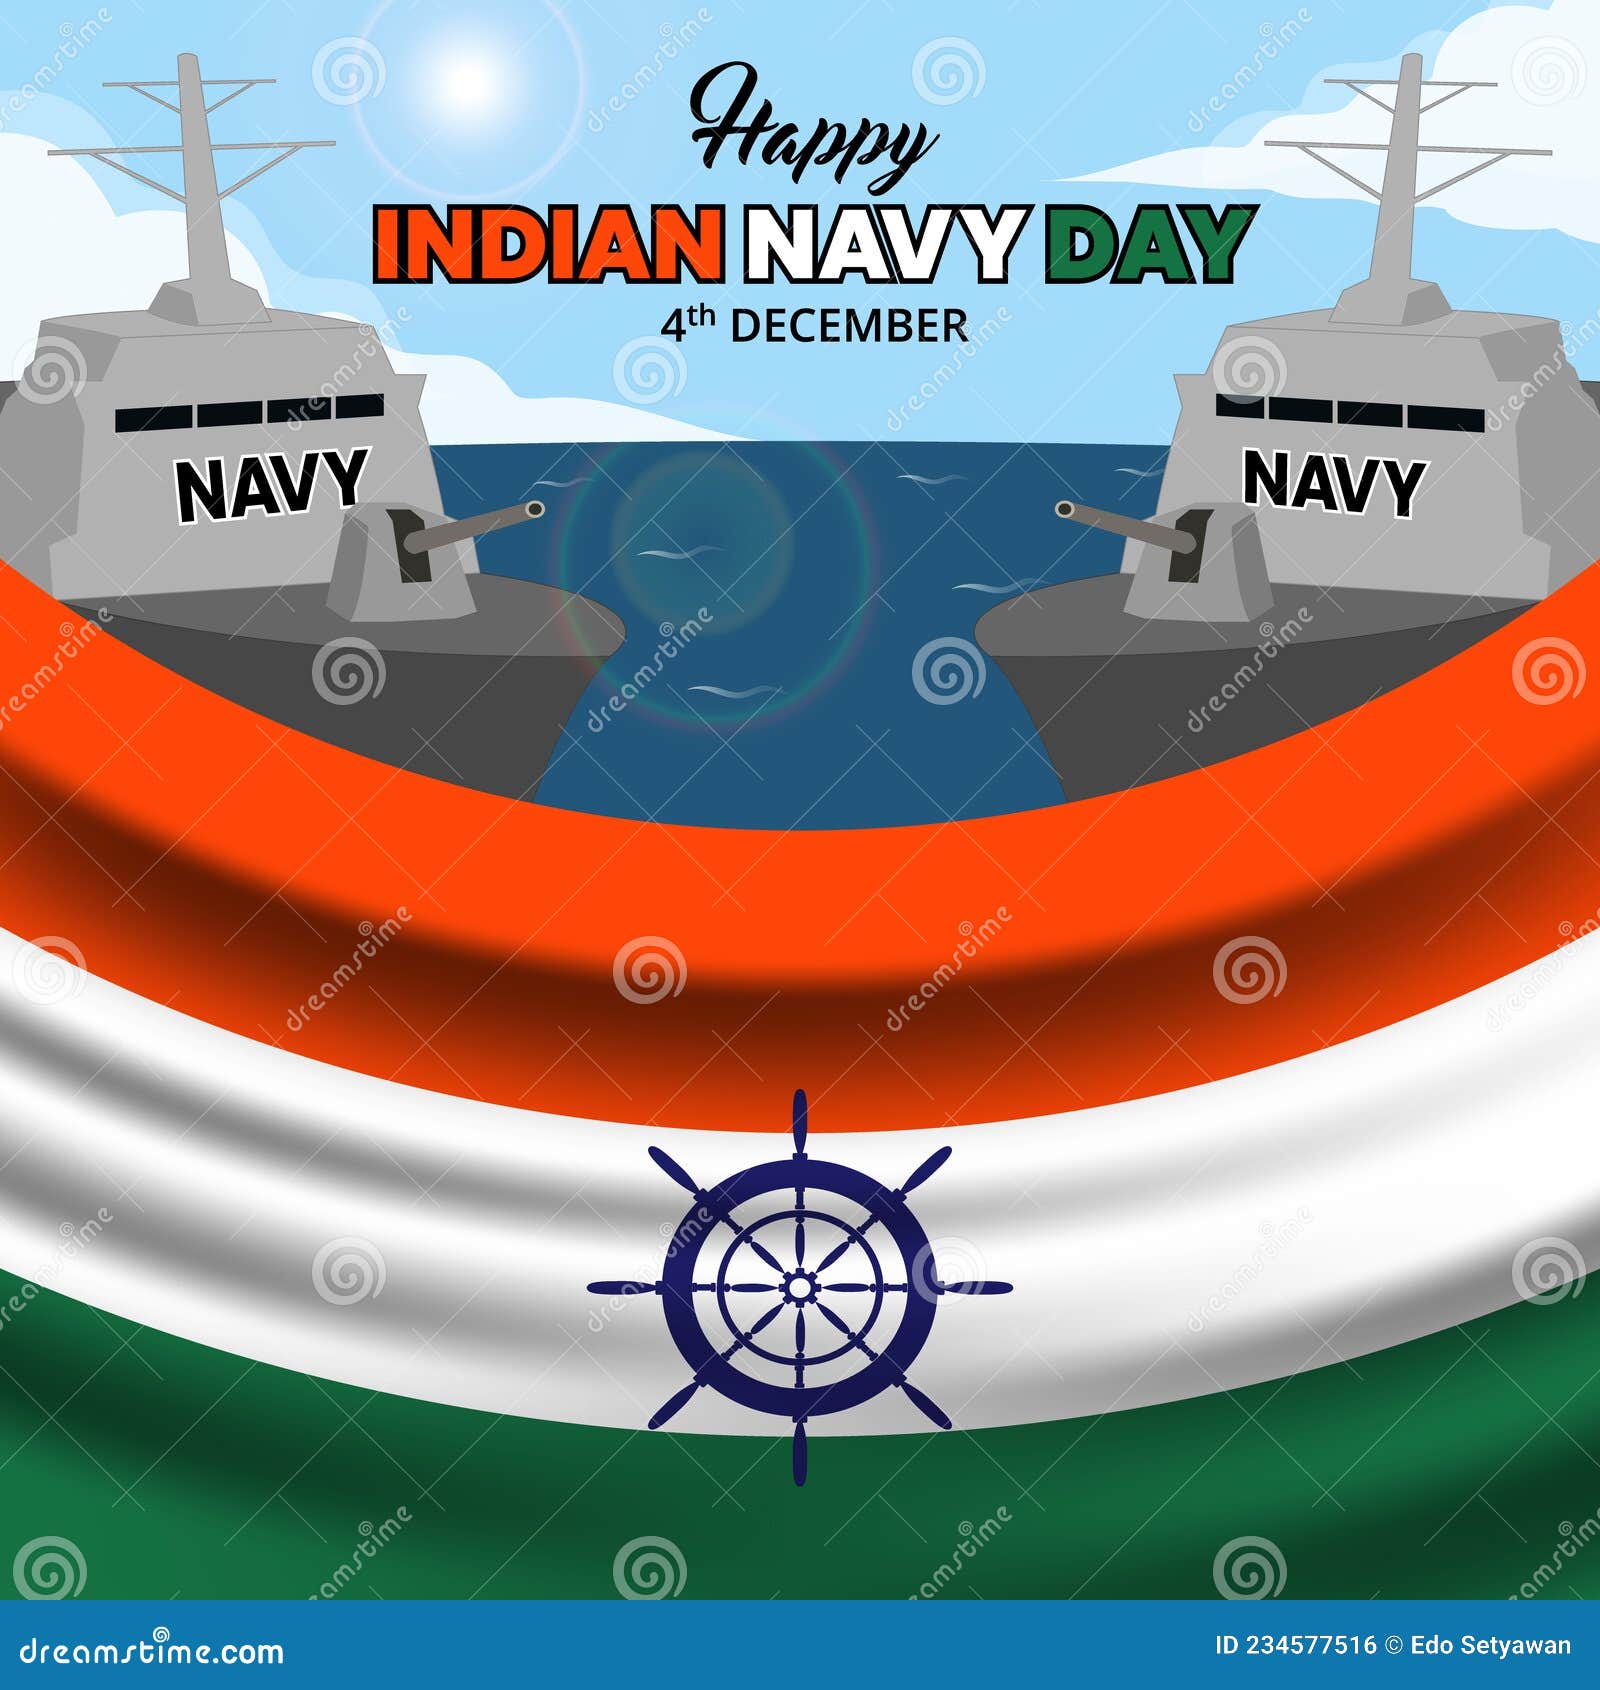 Happy Indian Navy Day Background with Two Naval Ships on the Sea with Flag  Stock Vector - Illustration of freedom, background: 234577516